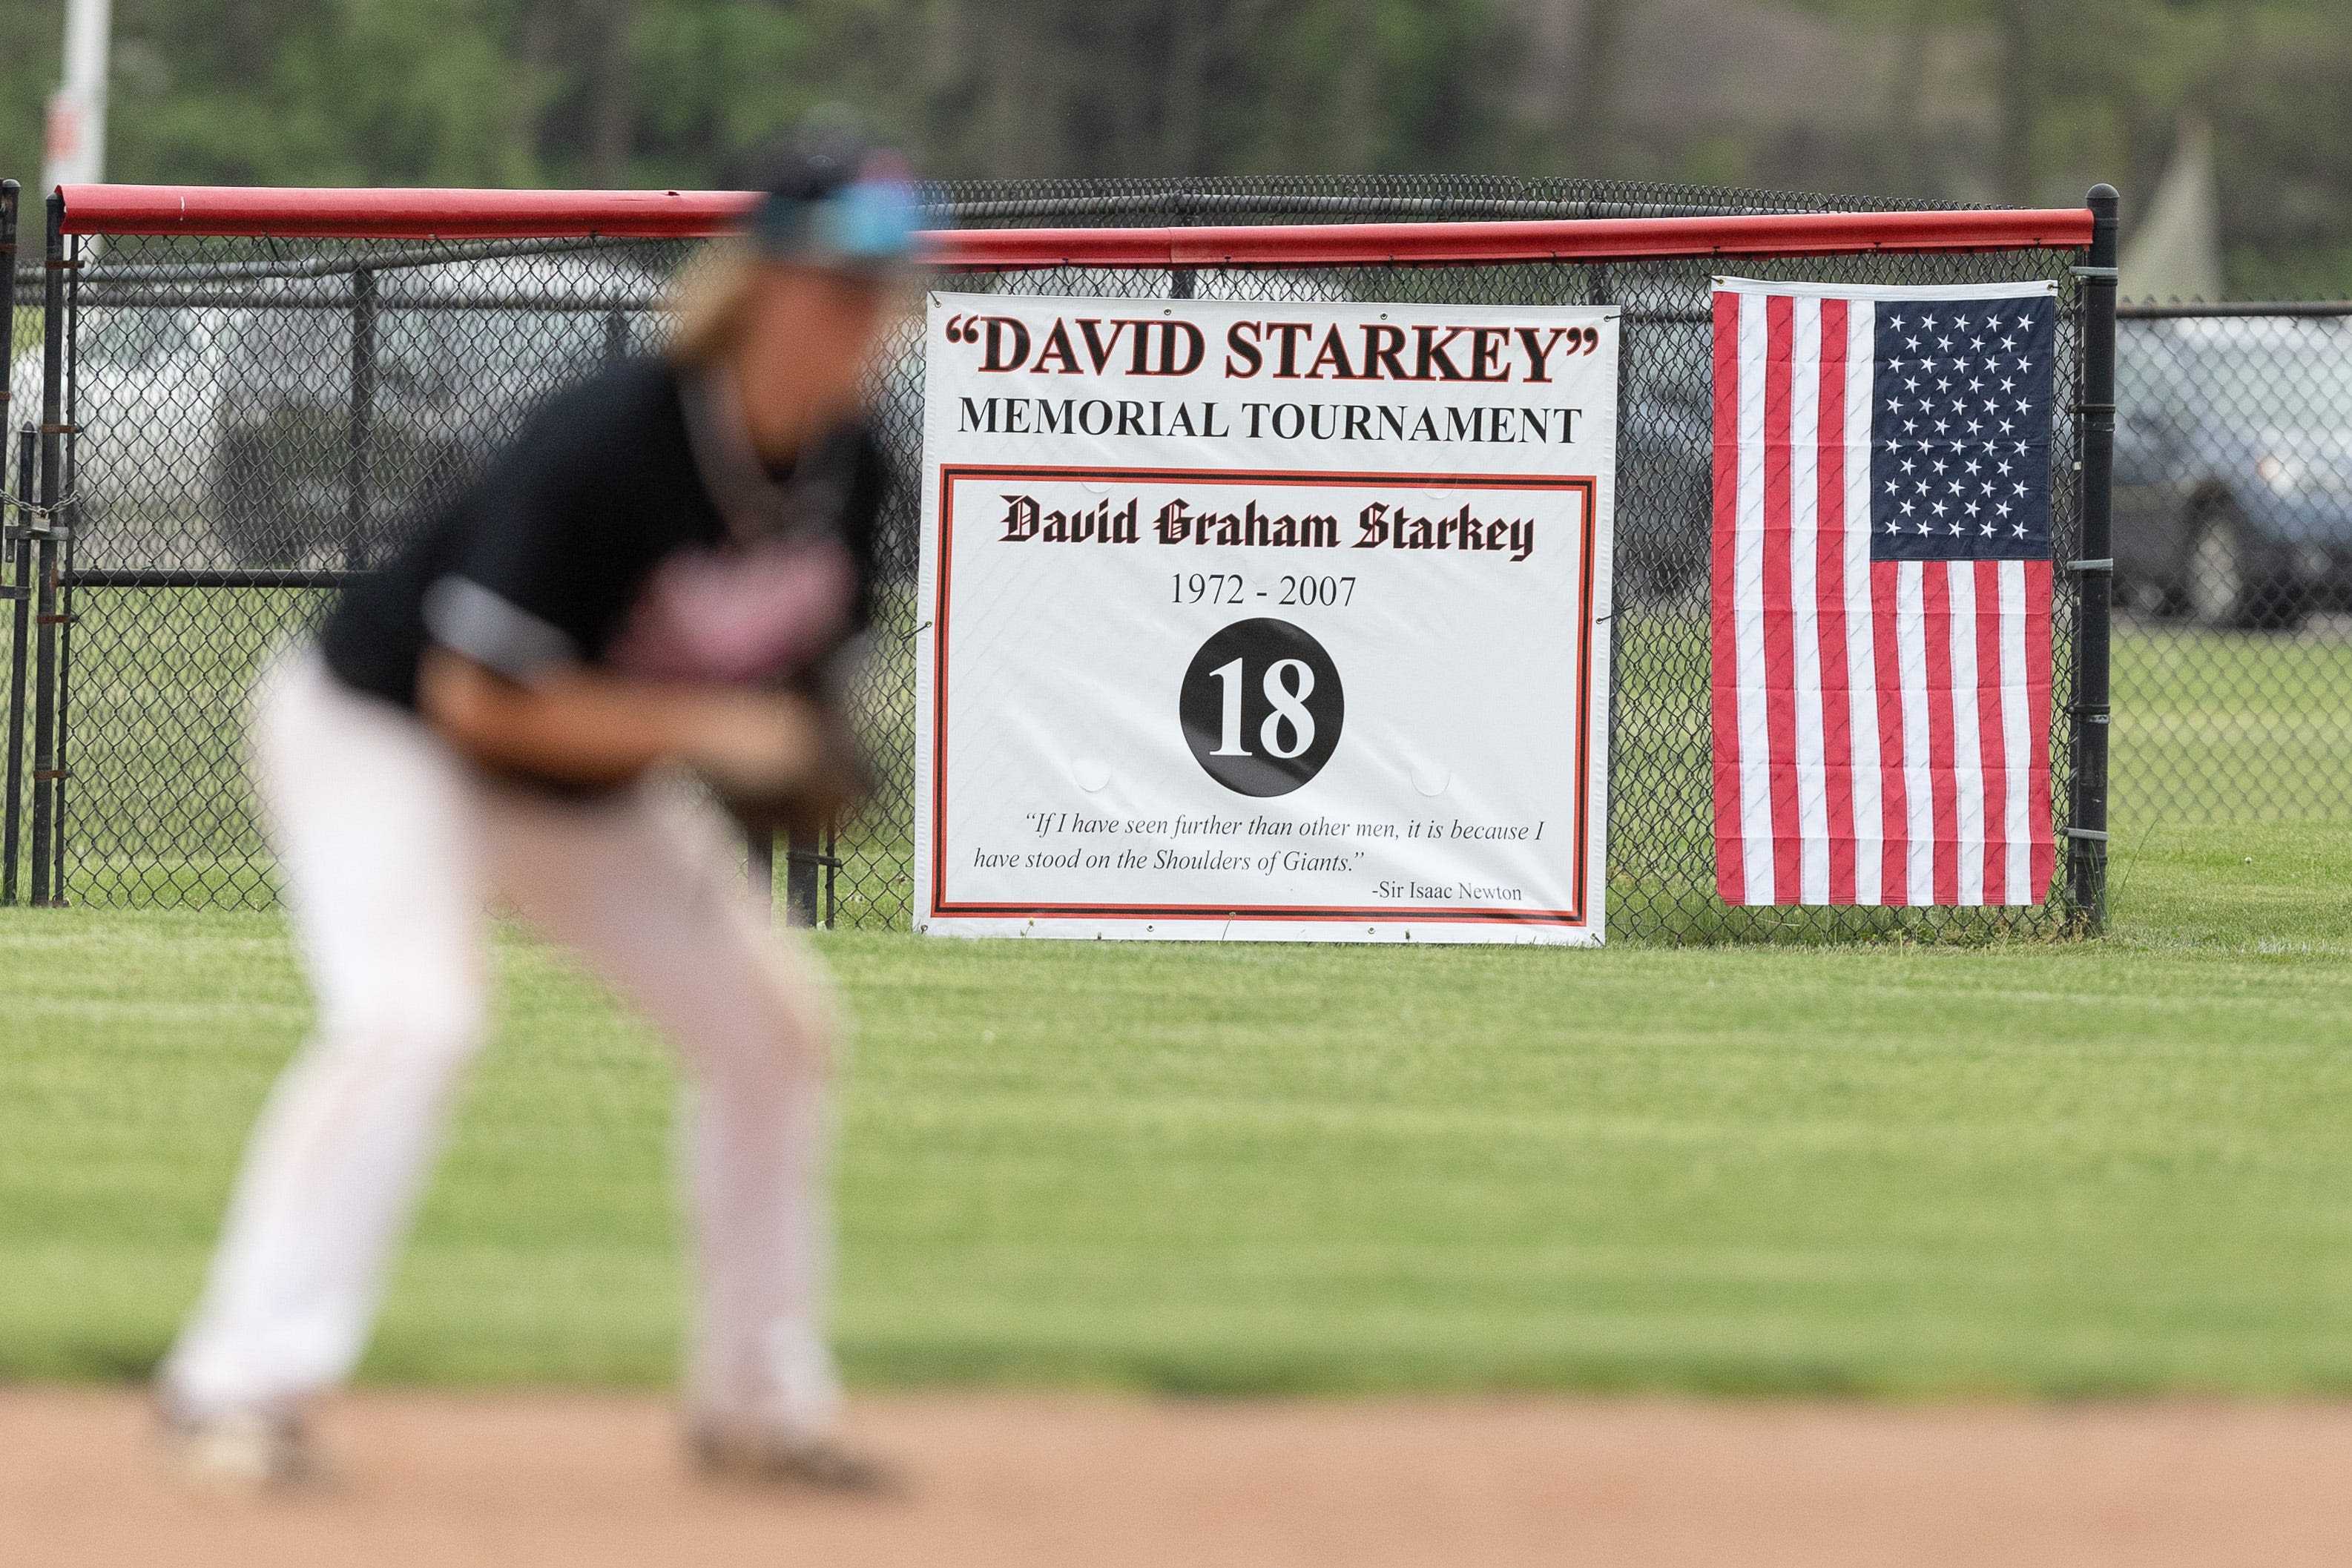 'It's my favorite week of the year': Roosevelt's Haney reflects on David Starkey's legacy